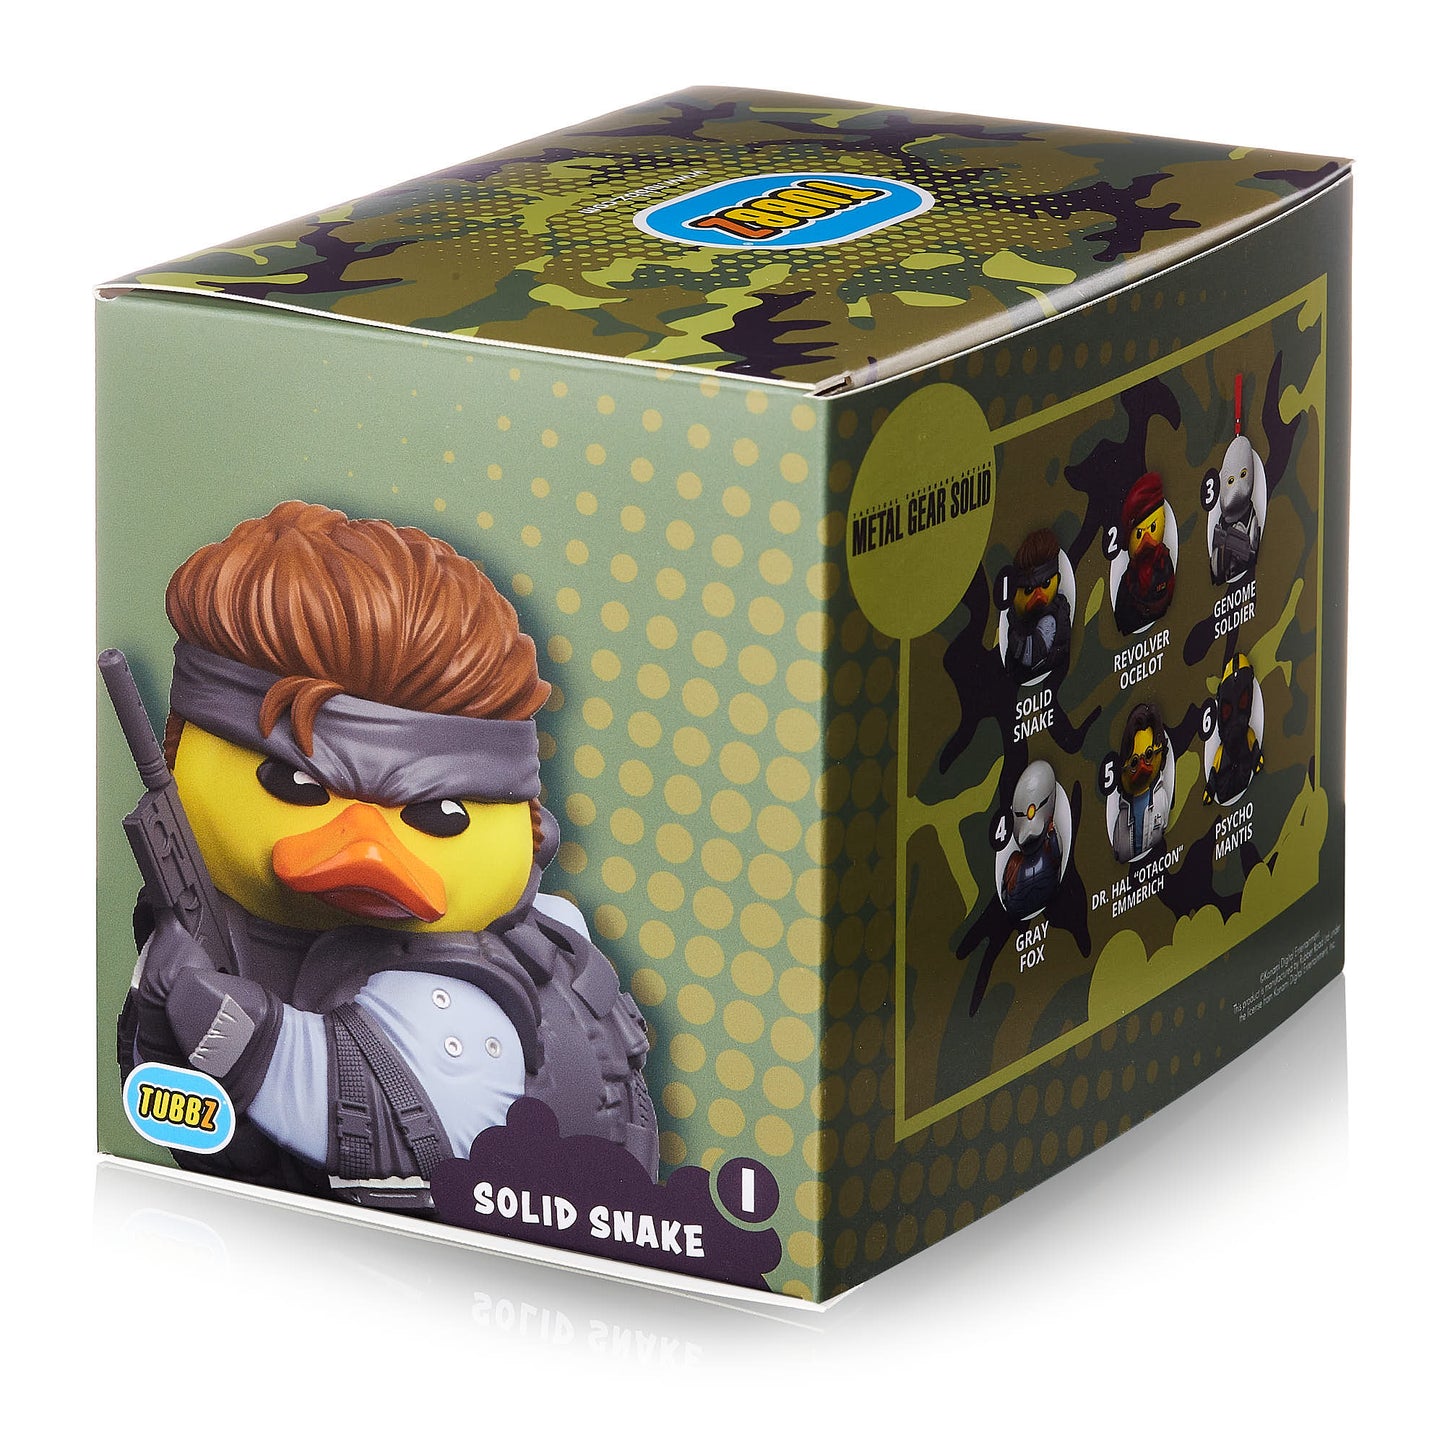 METAL GEAR SOLID SOLID SNAKE TUBBZ (BOXED EDITION) - KUWAIT